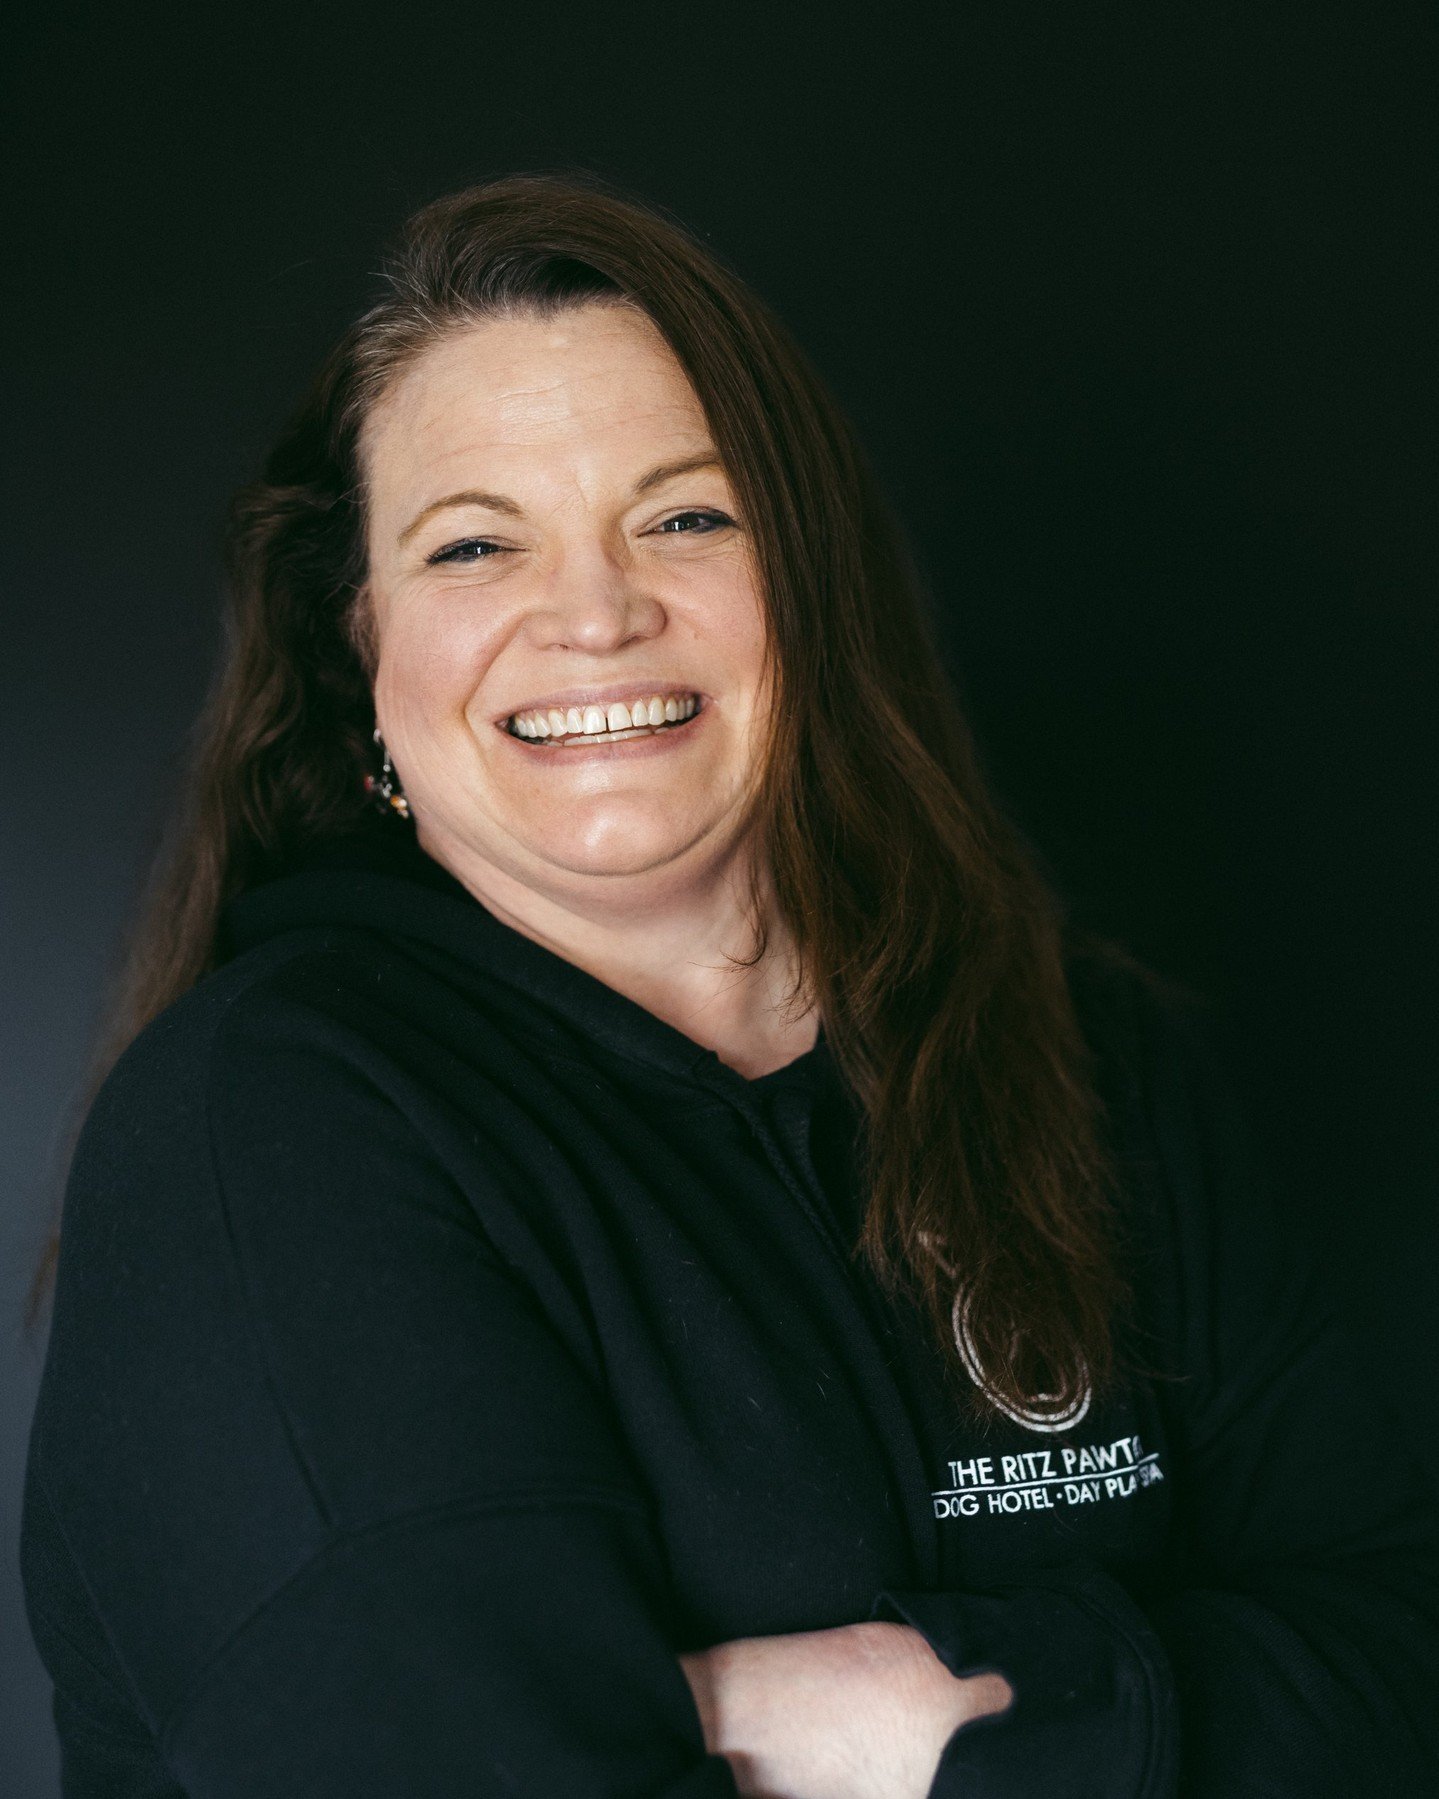 Meet Mellody! She's been immersed in pet care for most of her life, but her journey as a vet tech began when she was 12, making it 17 years of experience. Growing up, her family always fostered animals, creating a household filled with a variety of p